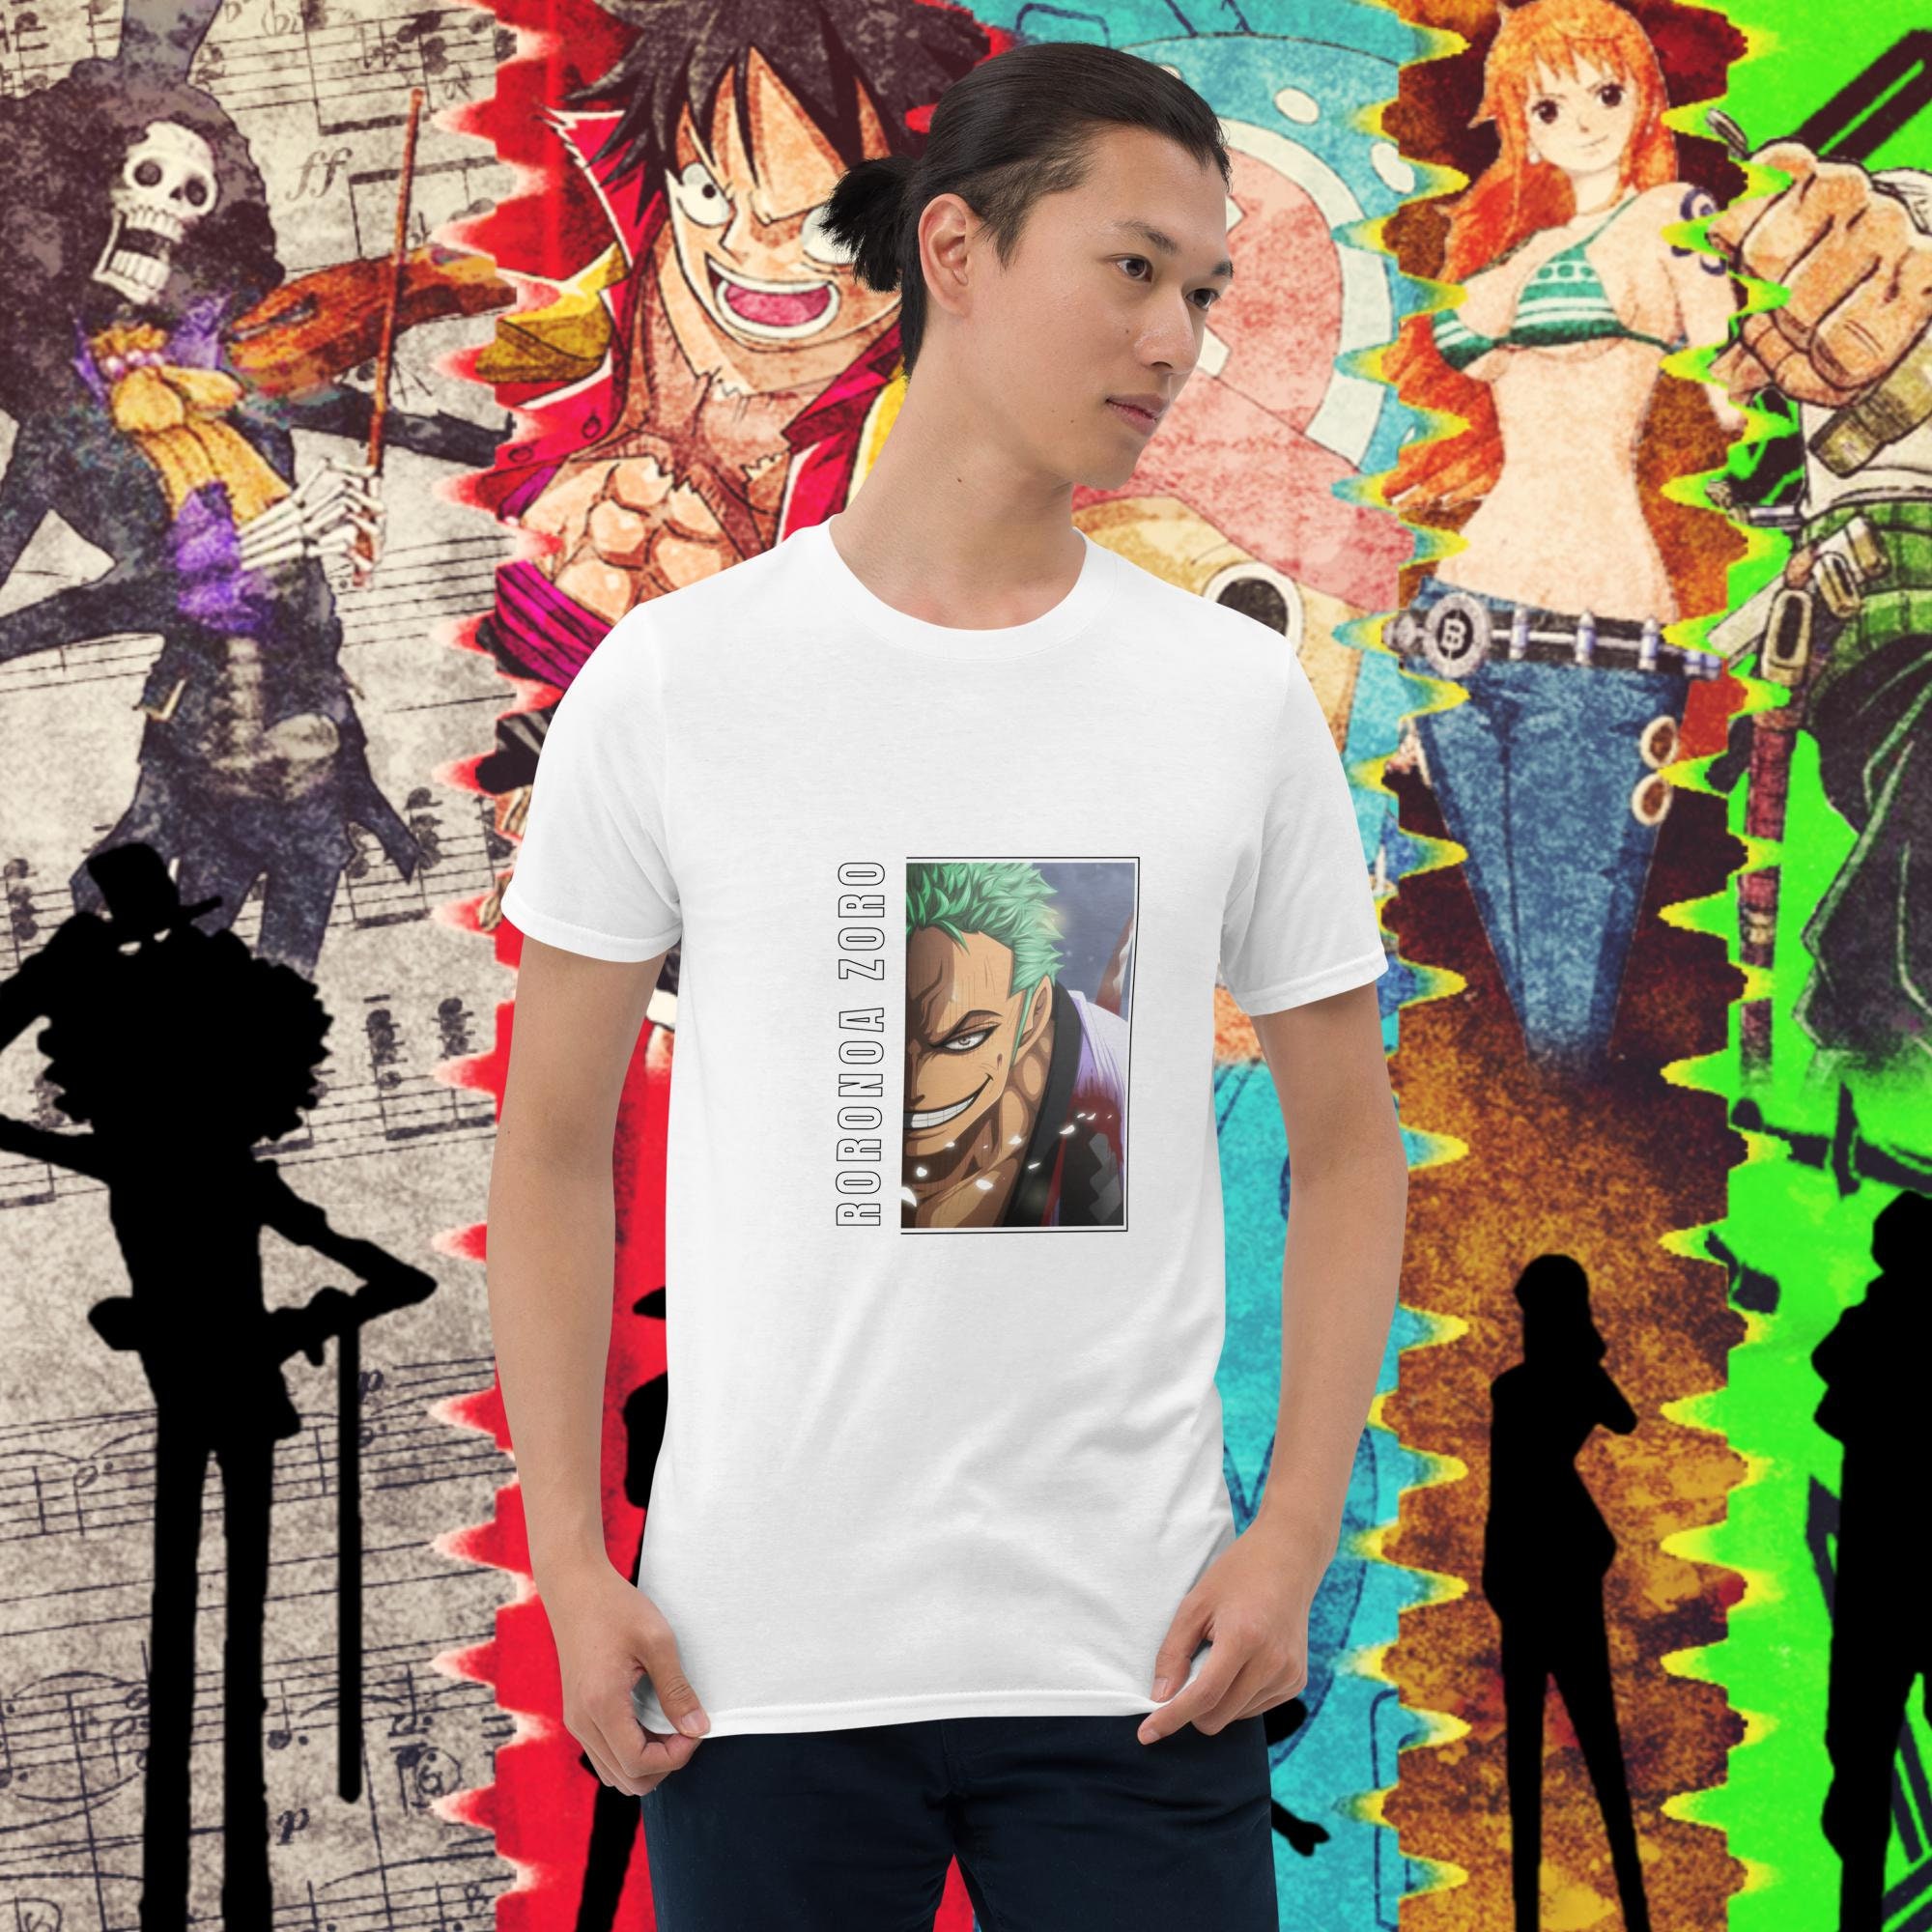 Zoro Enma T-Shirts for Sale